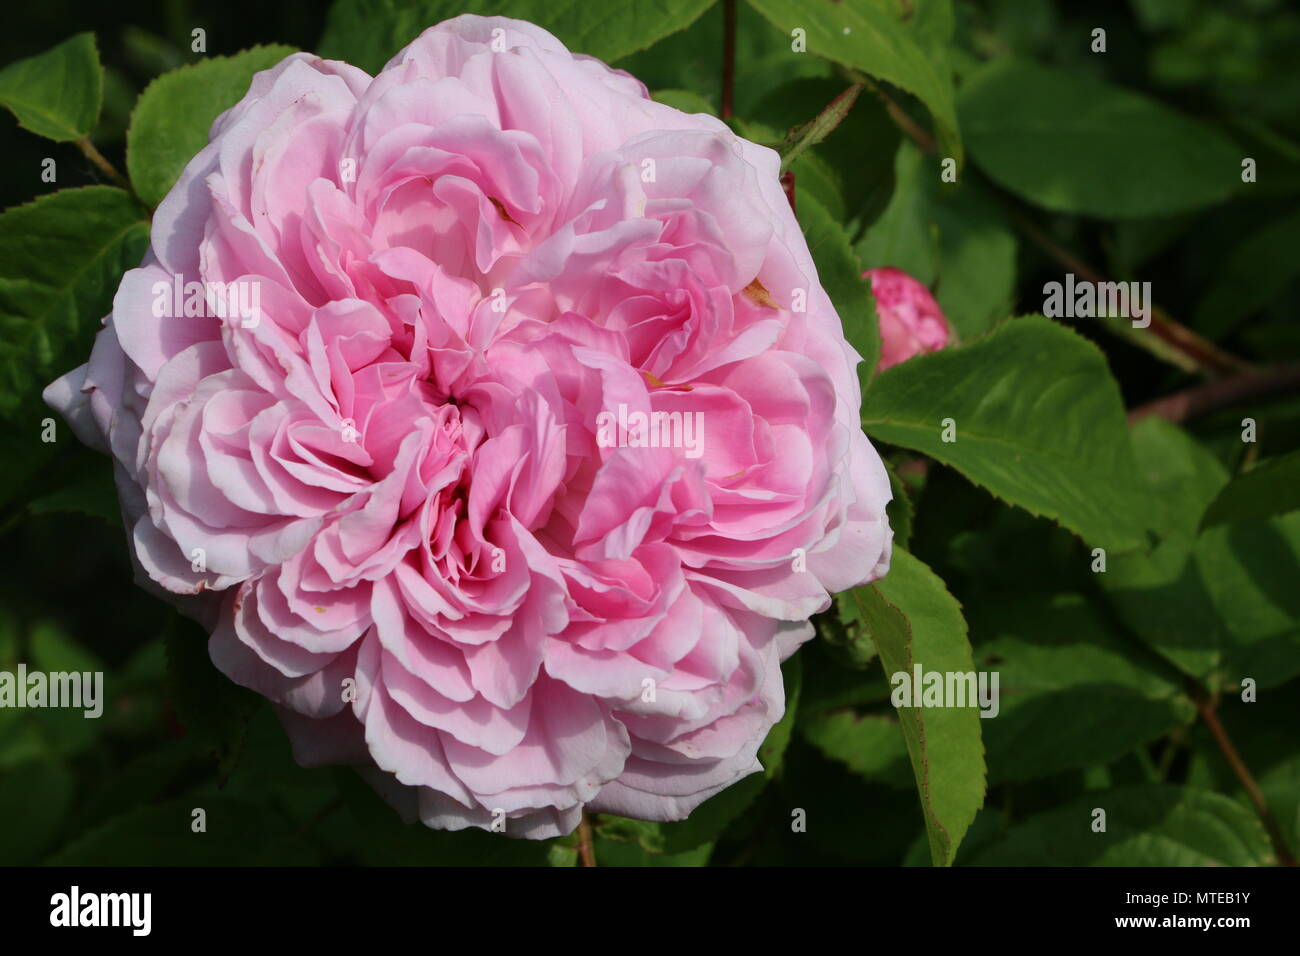 A close up view of a single beautiful historic heritage highly perfumed musk pink rose in full bloom growing in an English country garden in Summer Stock Photo